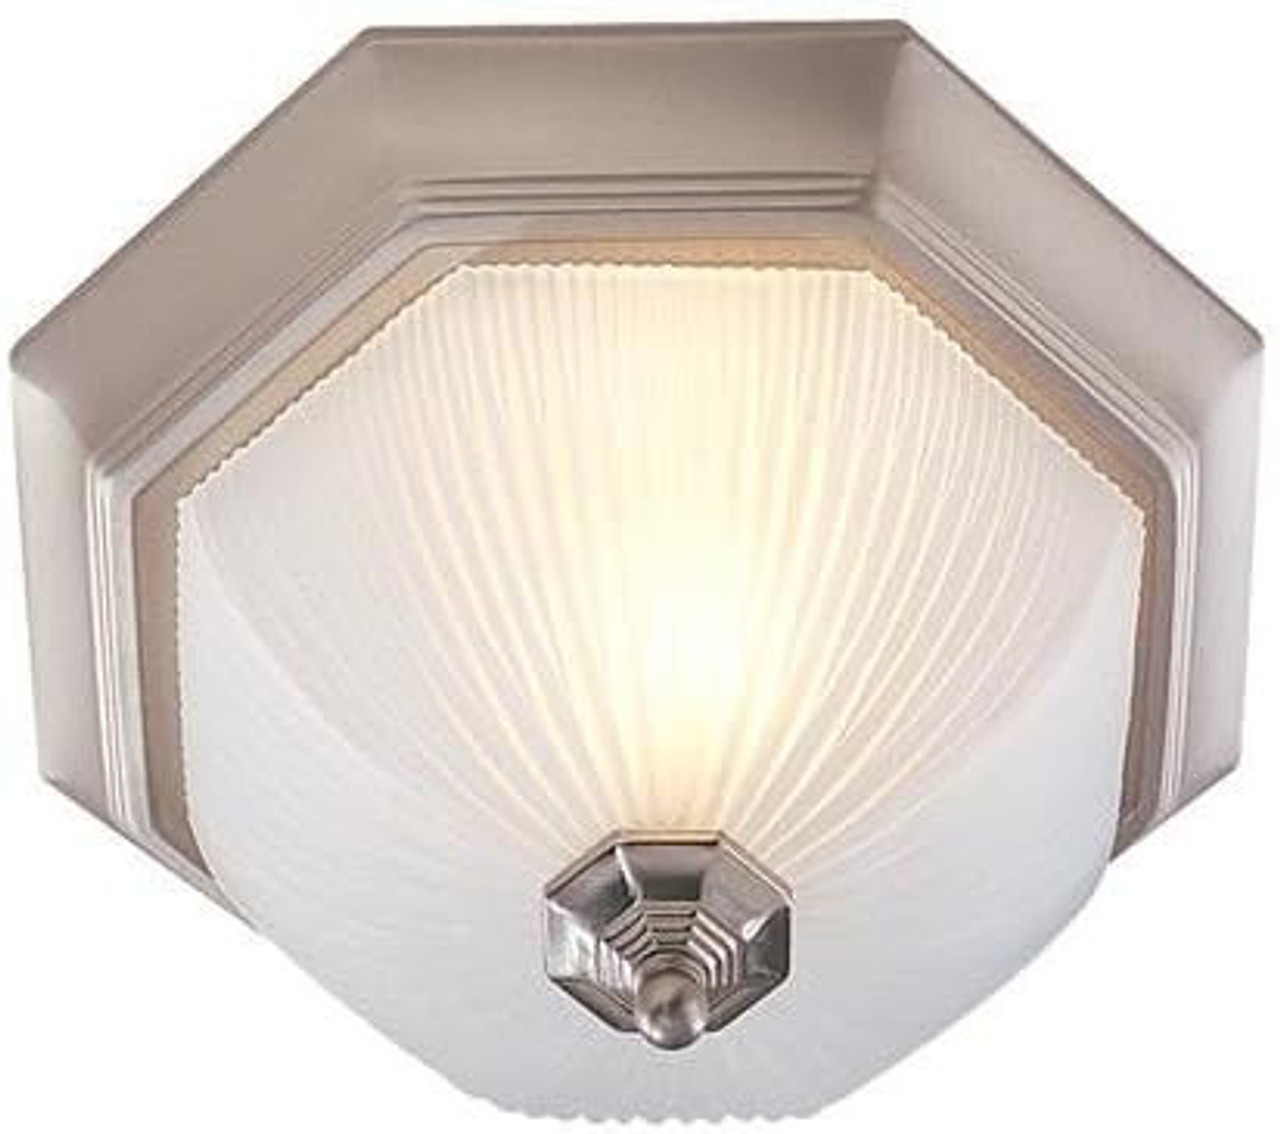 Monument 3 Light Ceiling Fixture |By the Pallet|  617039